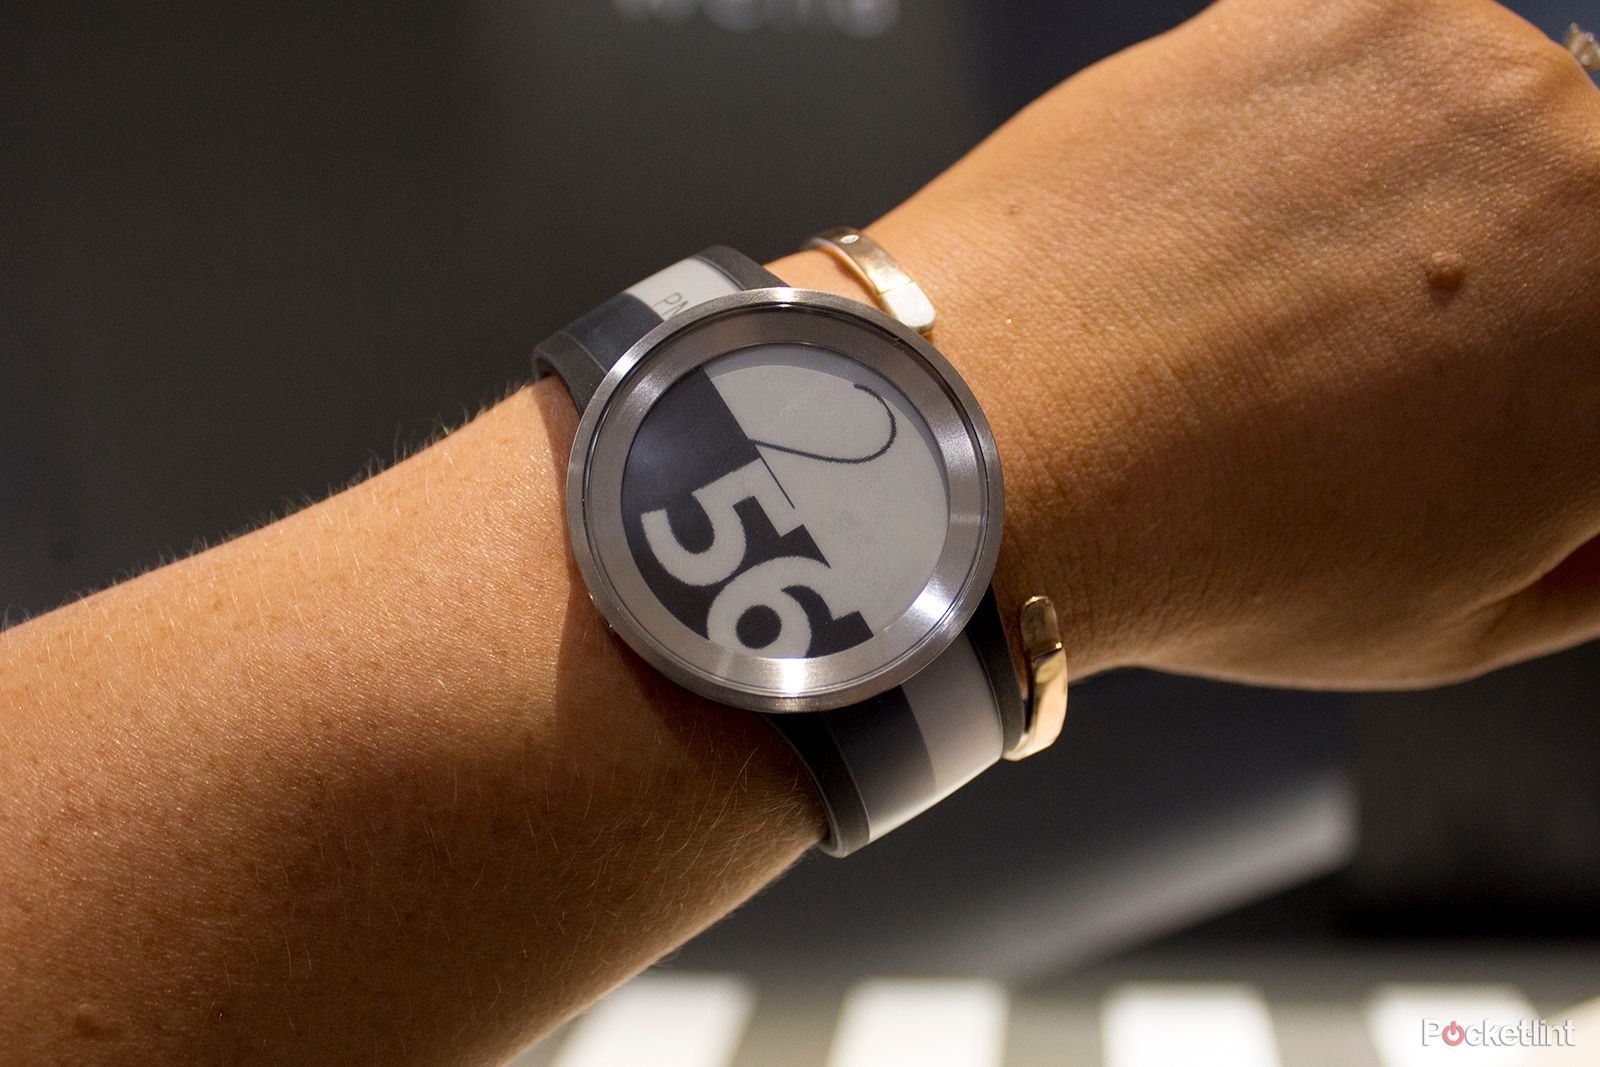 Sony Fes Watch U The E-paper Watch That Costs More Than An Apple Watch image 1